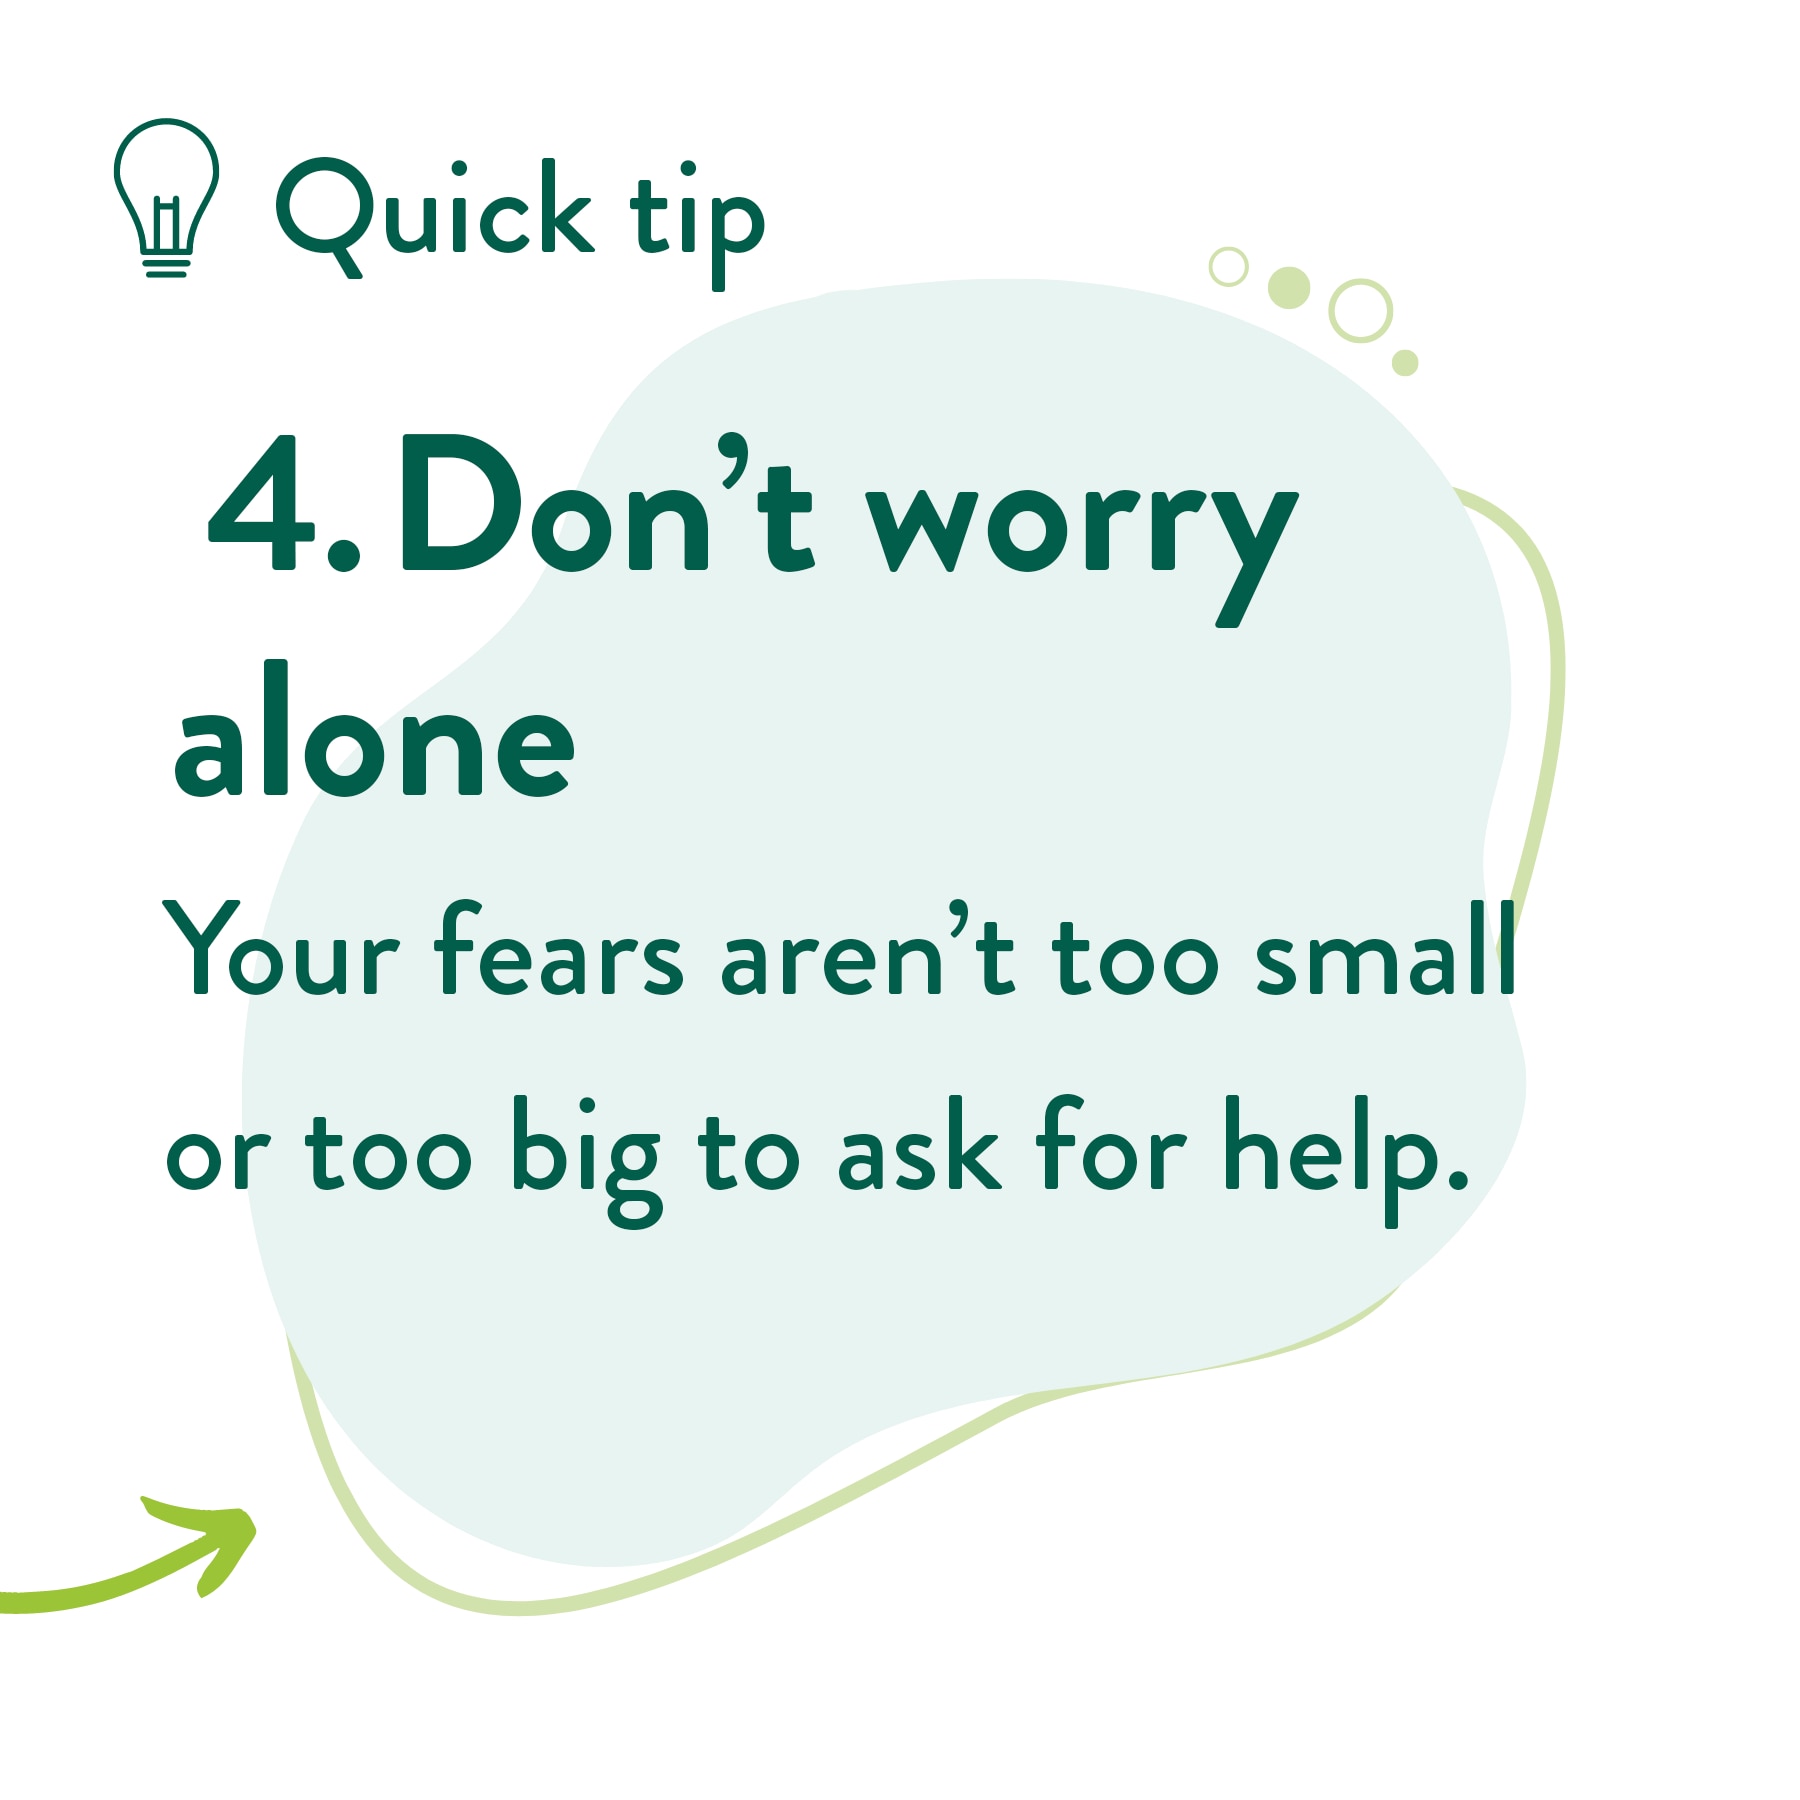 Your fears aren’t too small or too big to ask for help.